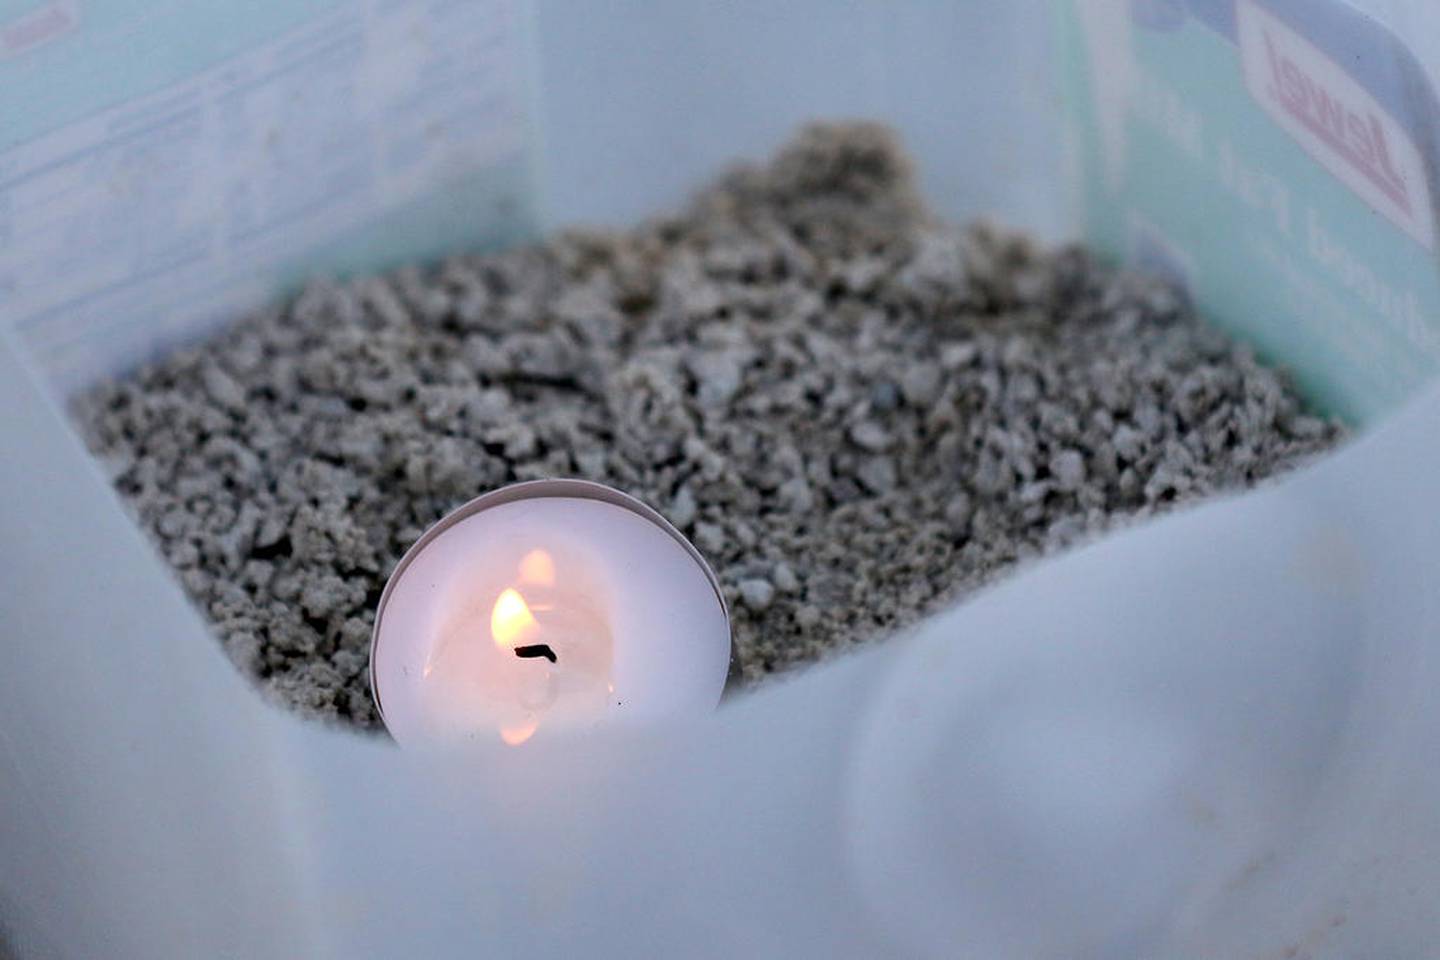 A candle is lit inside a milk jug at the start of the Holiday Night Hike at Veteran Acres Park on Friday, Dec. 4, 2020 in Crystal Lake.  The event was rebranded from a one-night "Luminaria Walk" event to a 6-night "Holiday Night Hike" to allow for better social distancing to avoid a crowded one-night event.